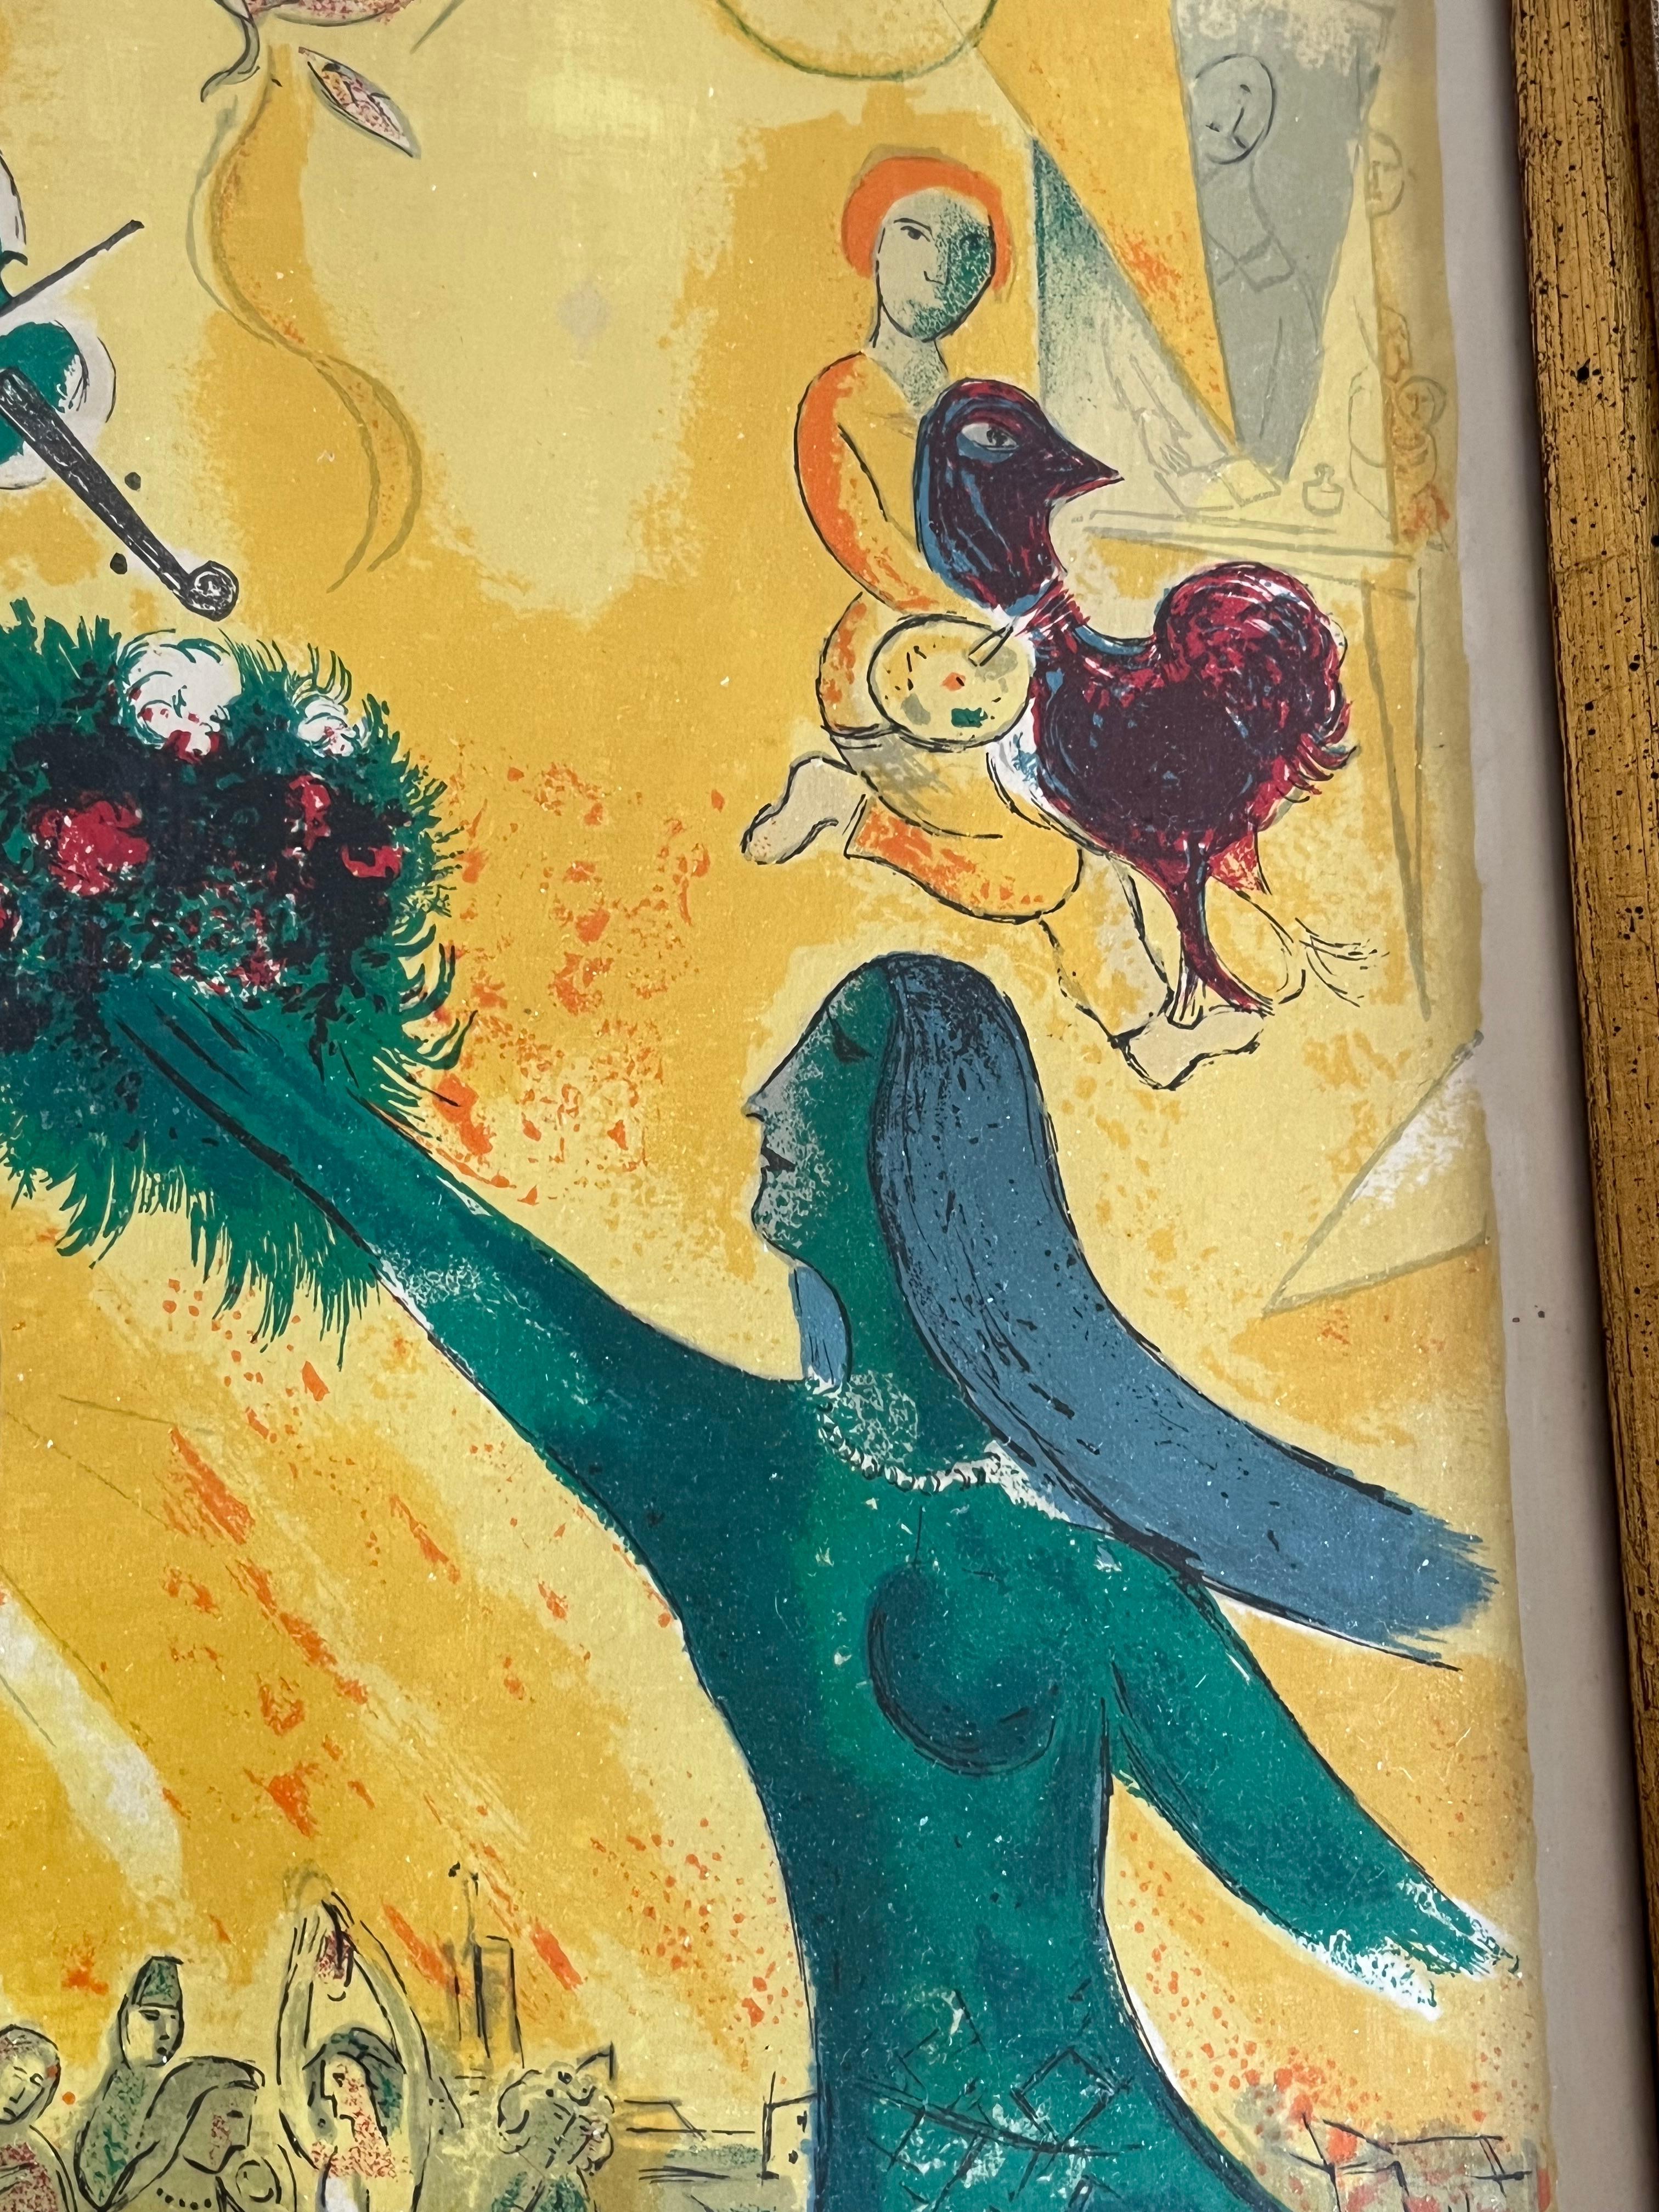 Marc Chagall “The Dance” 1950 Litho In Good Condition For Sale In Doylestown, PA